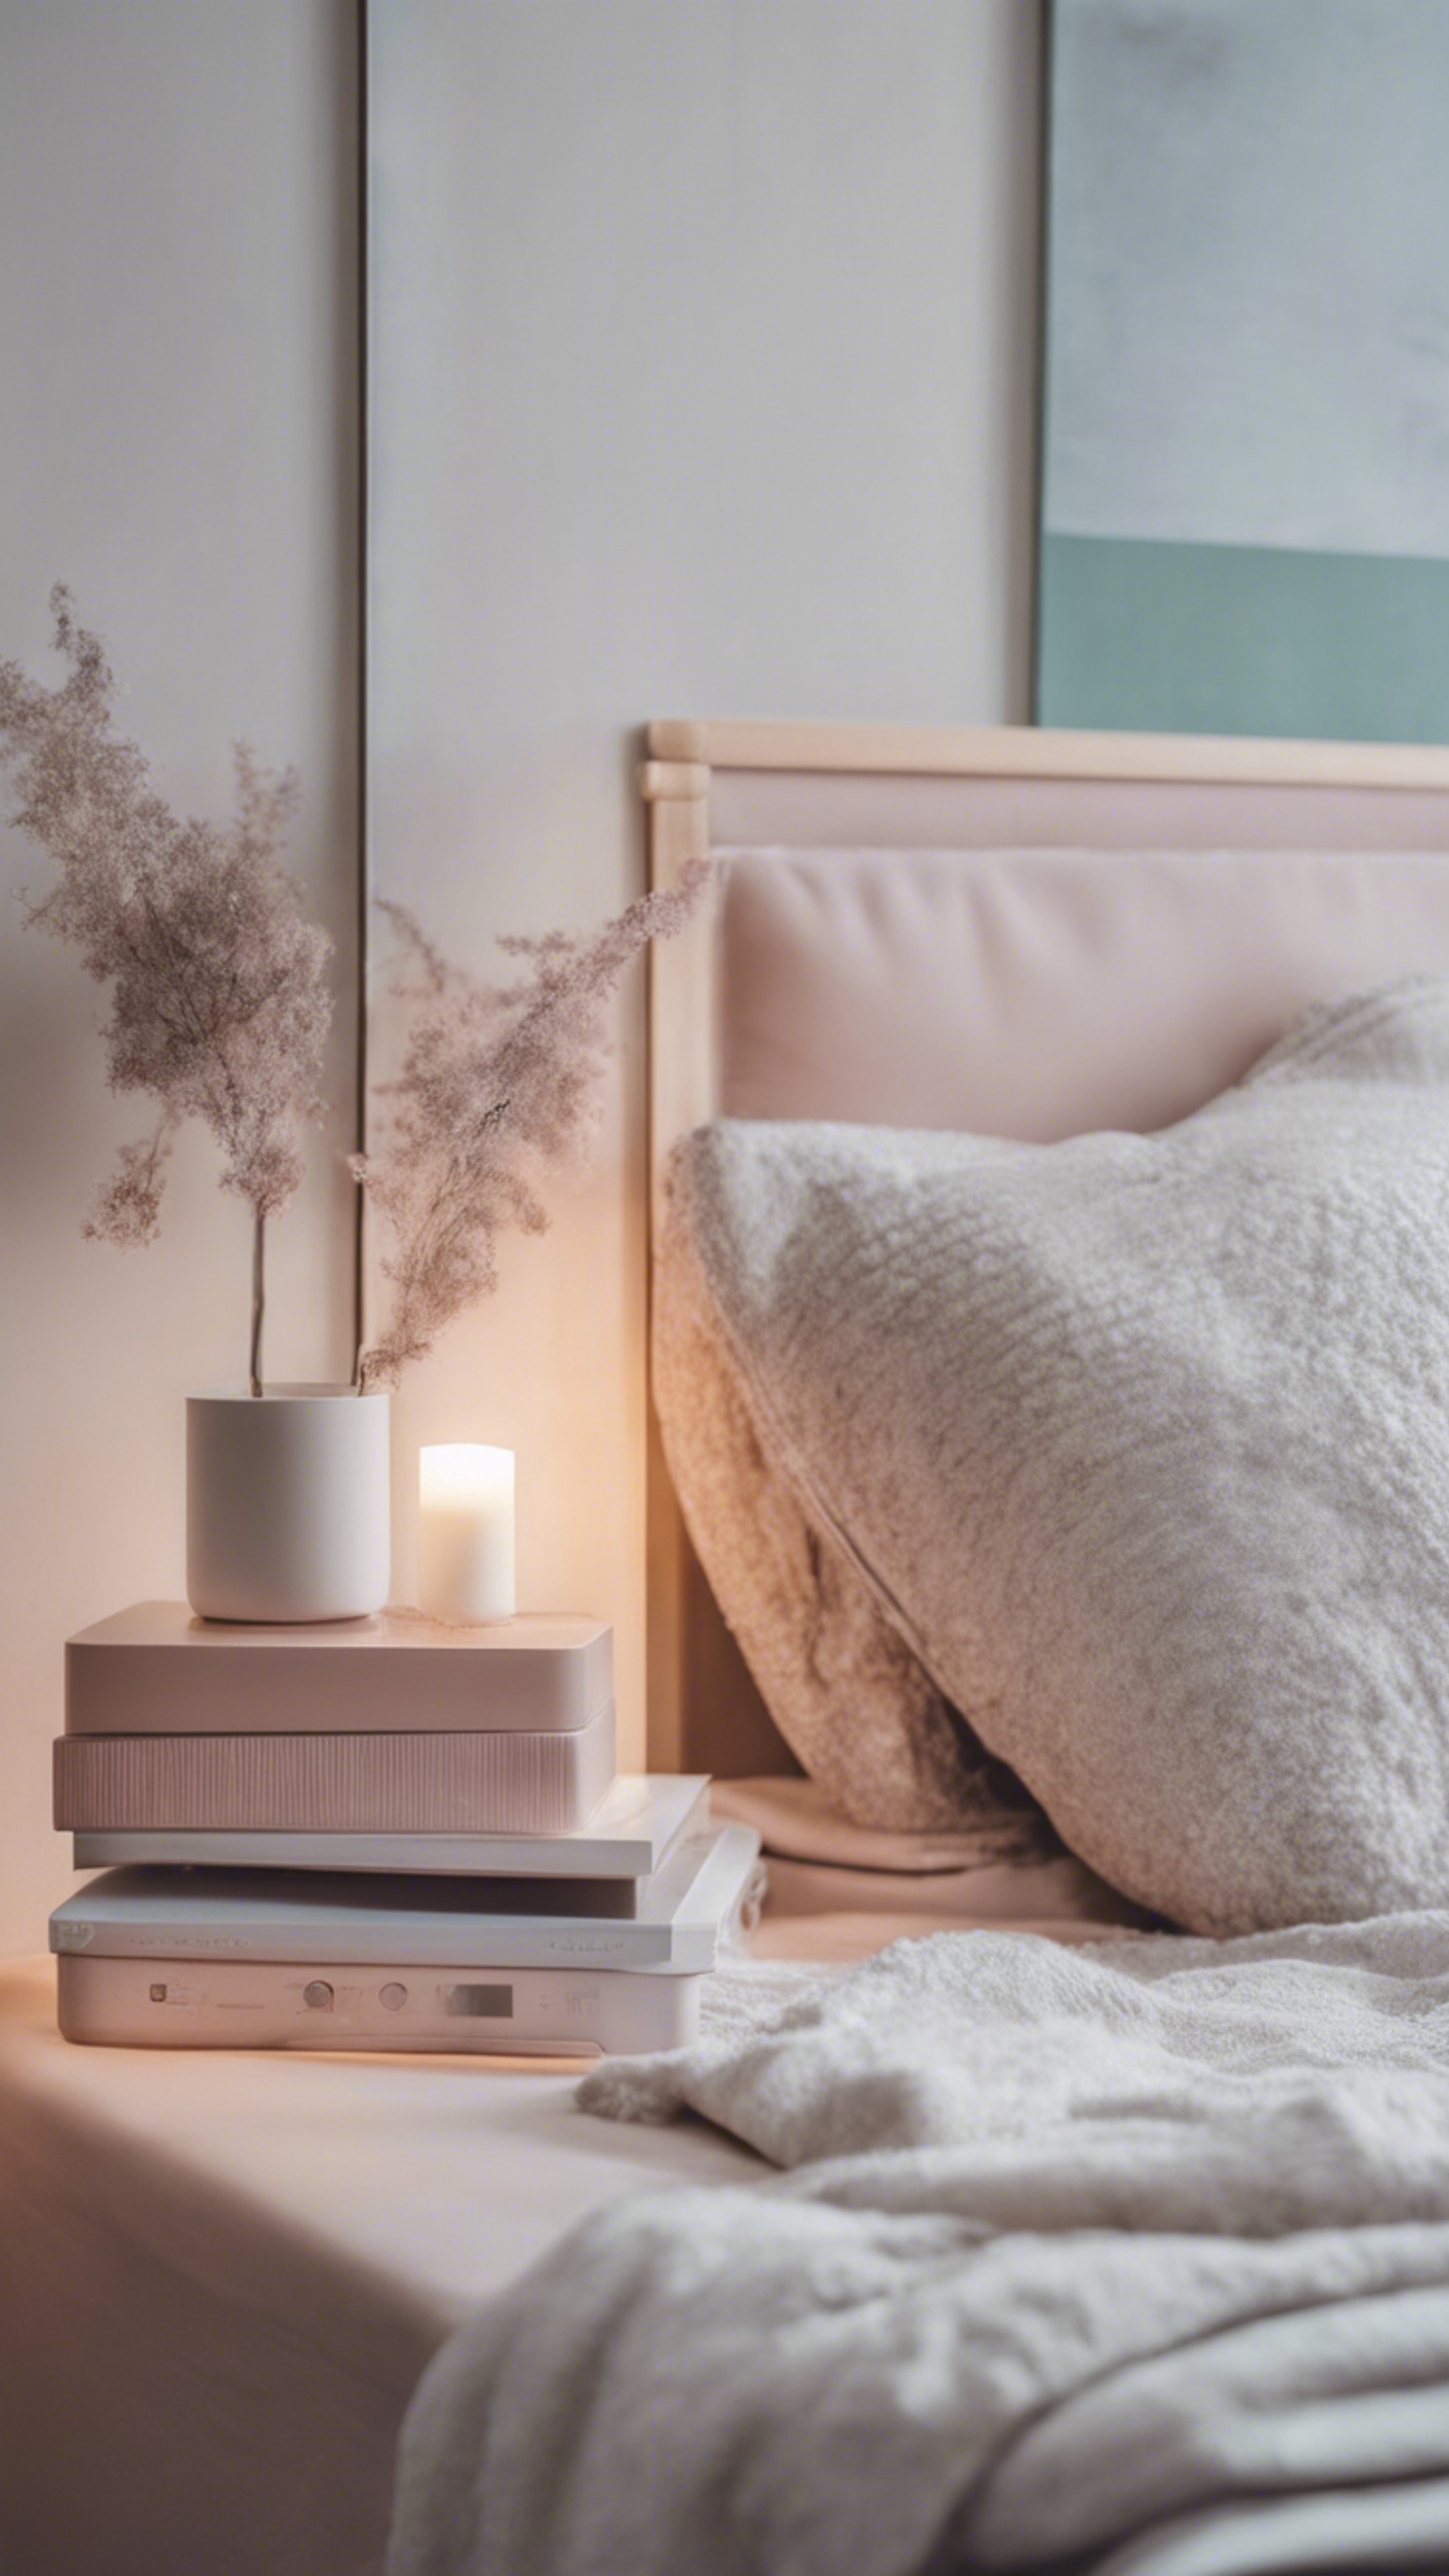 A modern minimalist bedroom in pastel hues with cozy blankets and a stylish bedside table. 墙纸[e12df14007a0419d89d8]